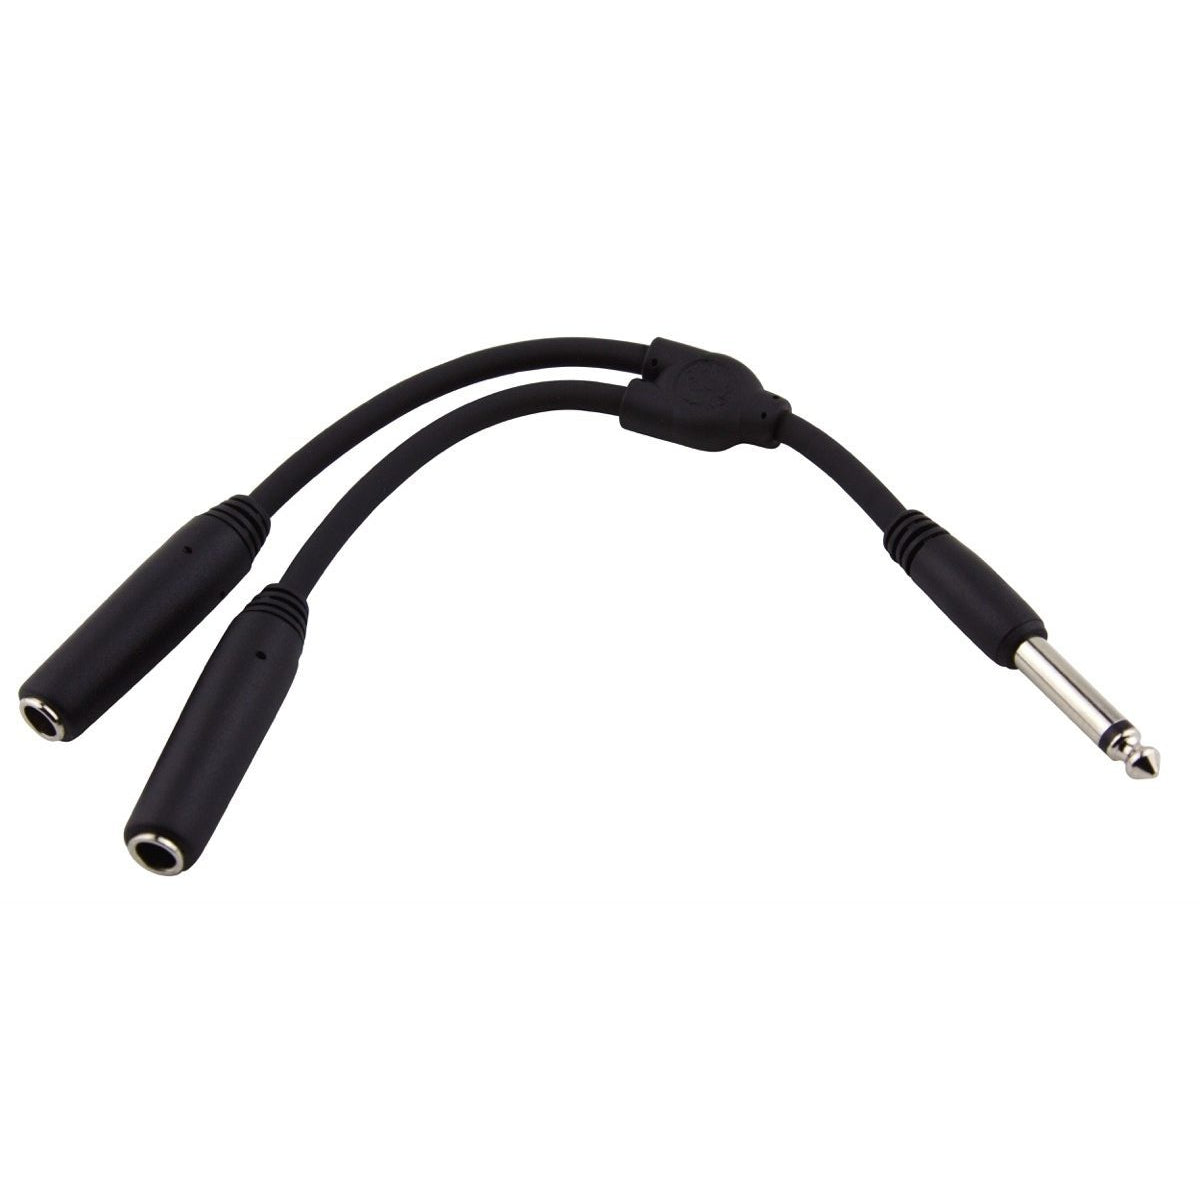 Pig Hog 1/4 Inch to Dual 1/4 Inch Mono Y-Cable, 6 Foot